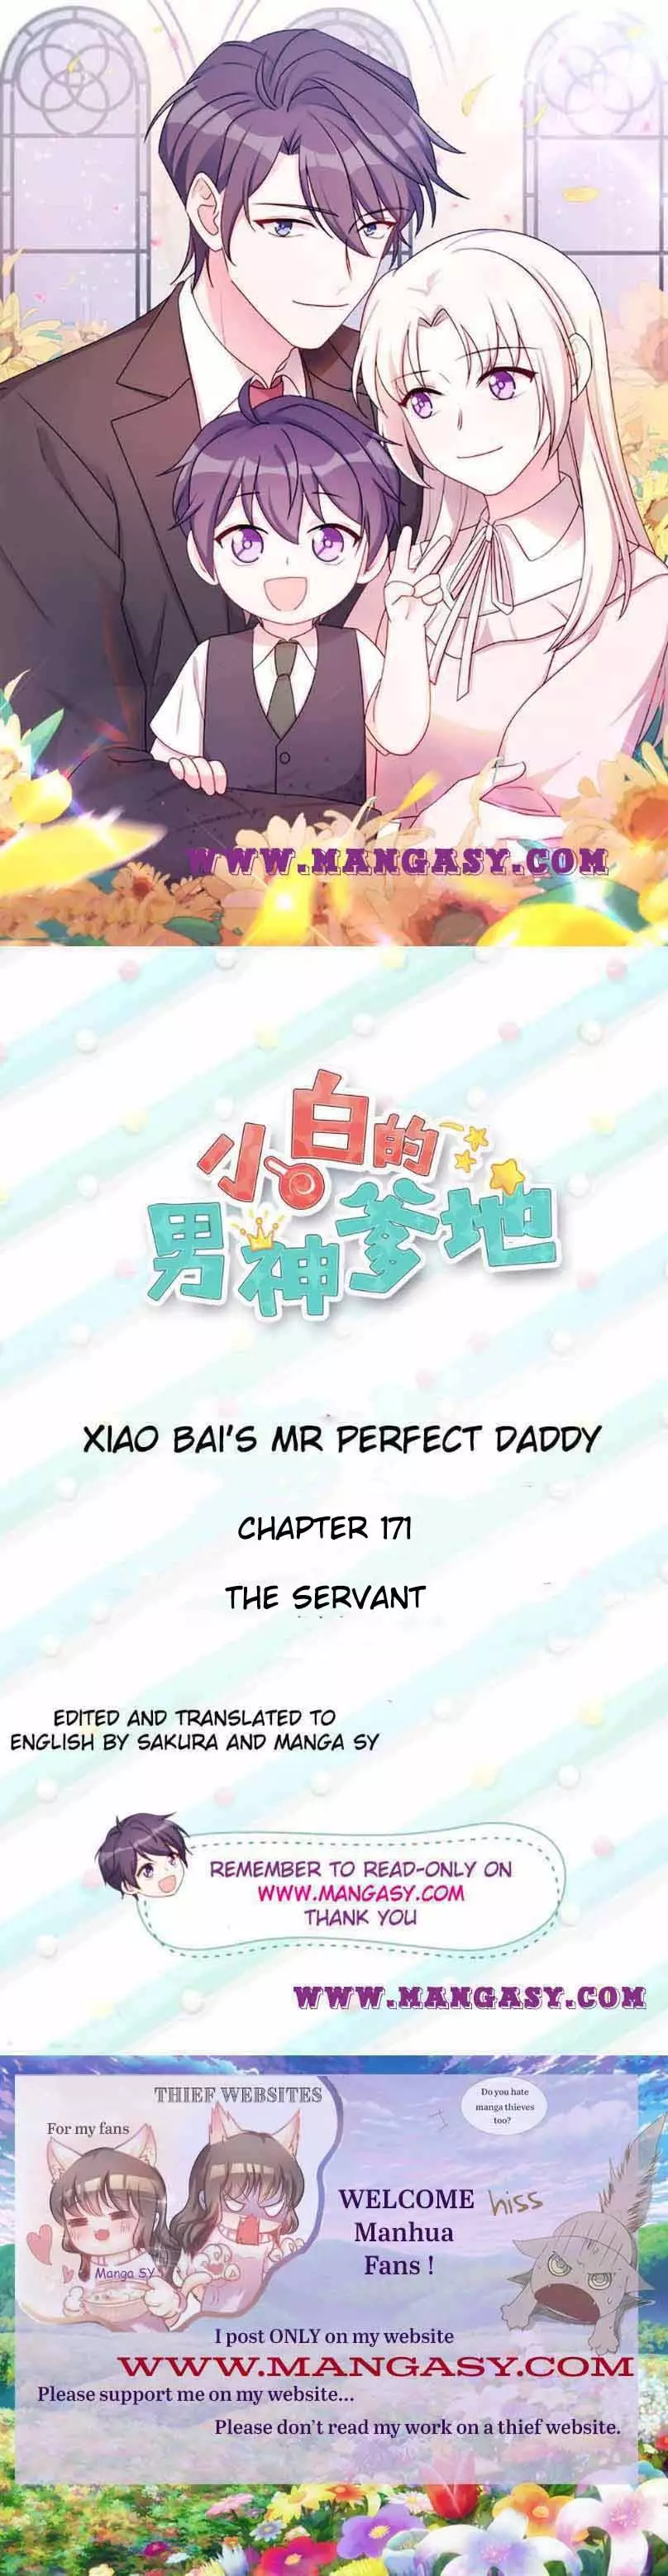 Xiao Bai’S Father Is A Wonderful Person - 171 page 1-22ea5f97